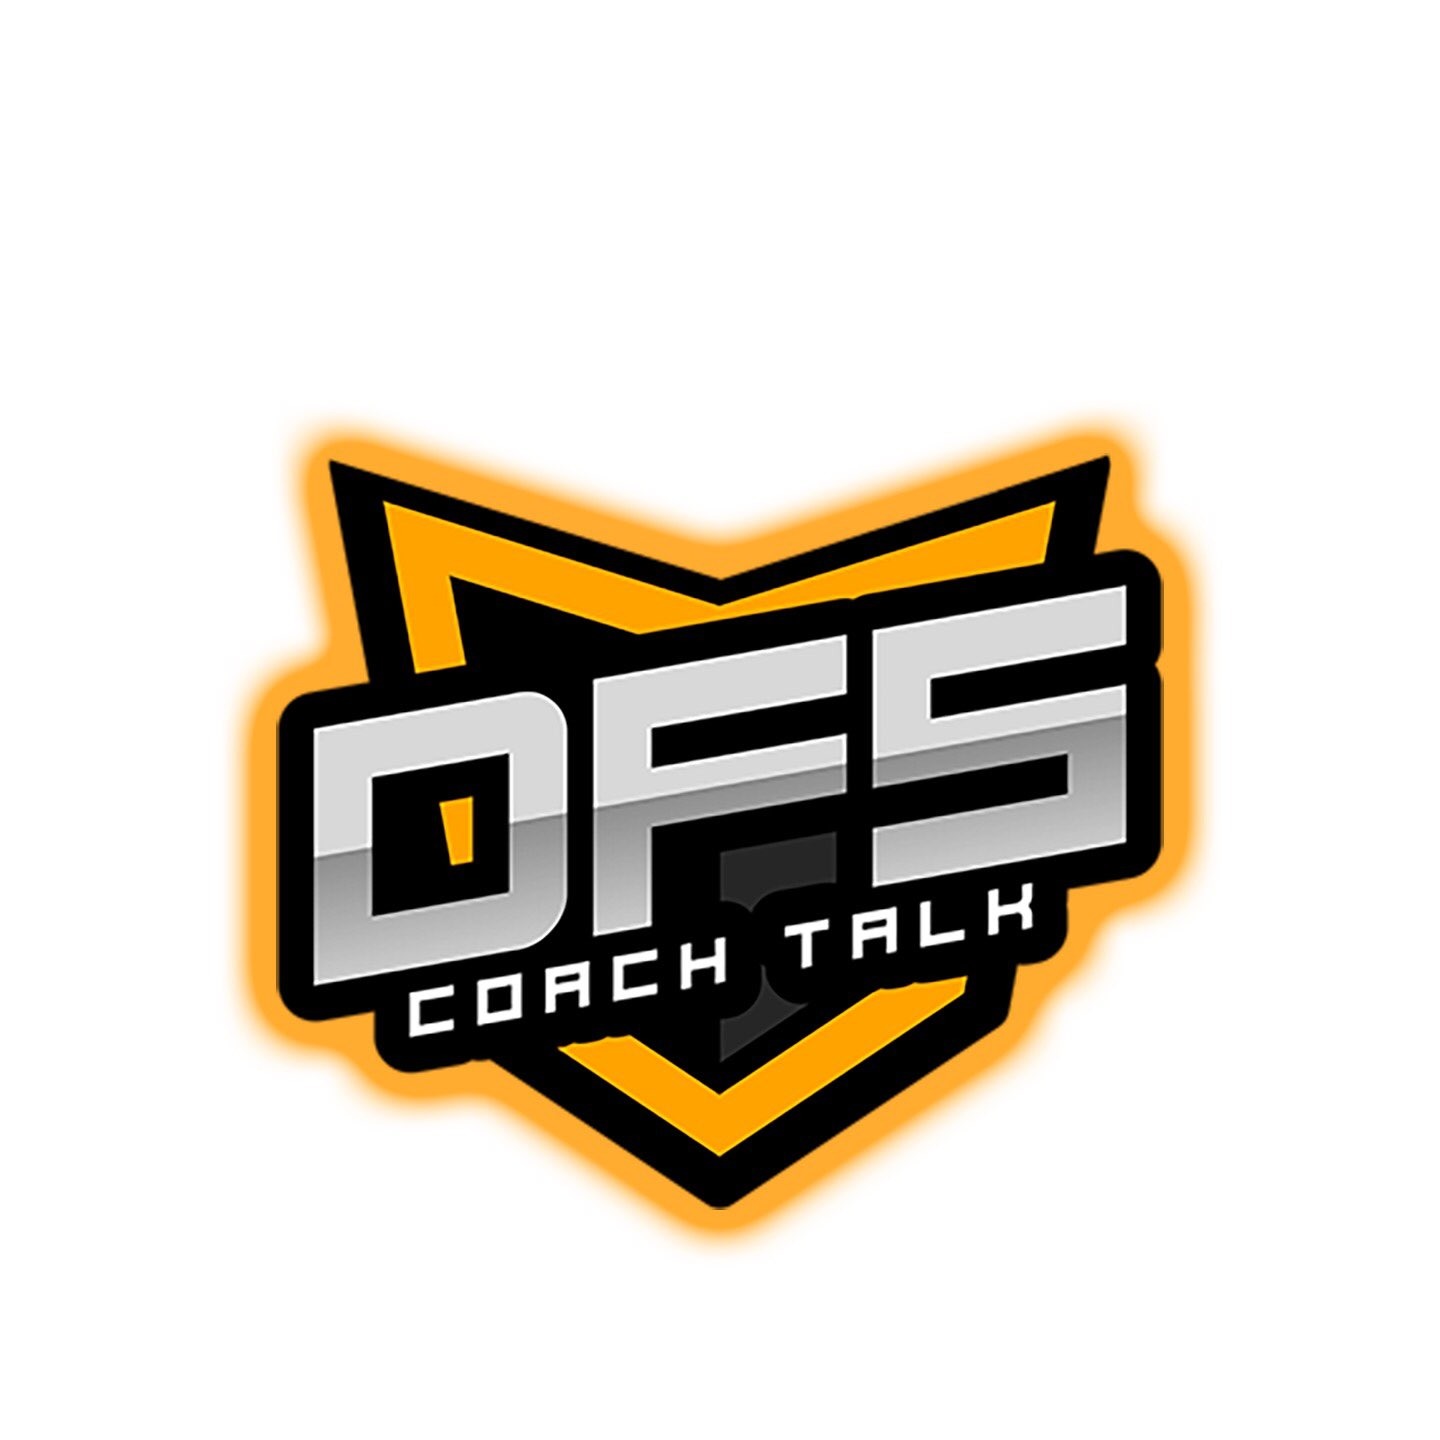 NFL DFS WEEK 4 PLAYER PICKS FOR FANDUEL AND DRAFTKINGS  with DFS COACH TALK! LETS GO!